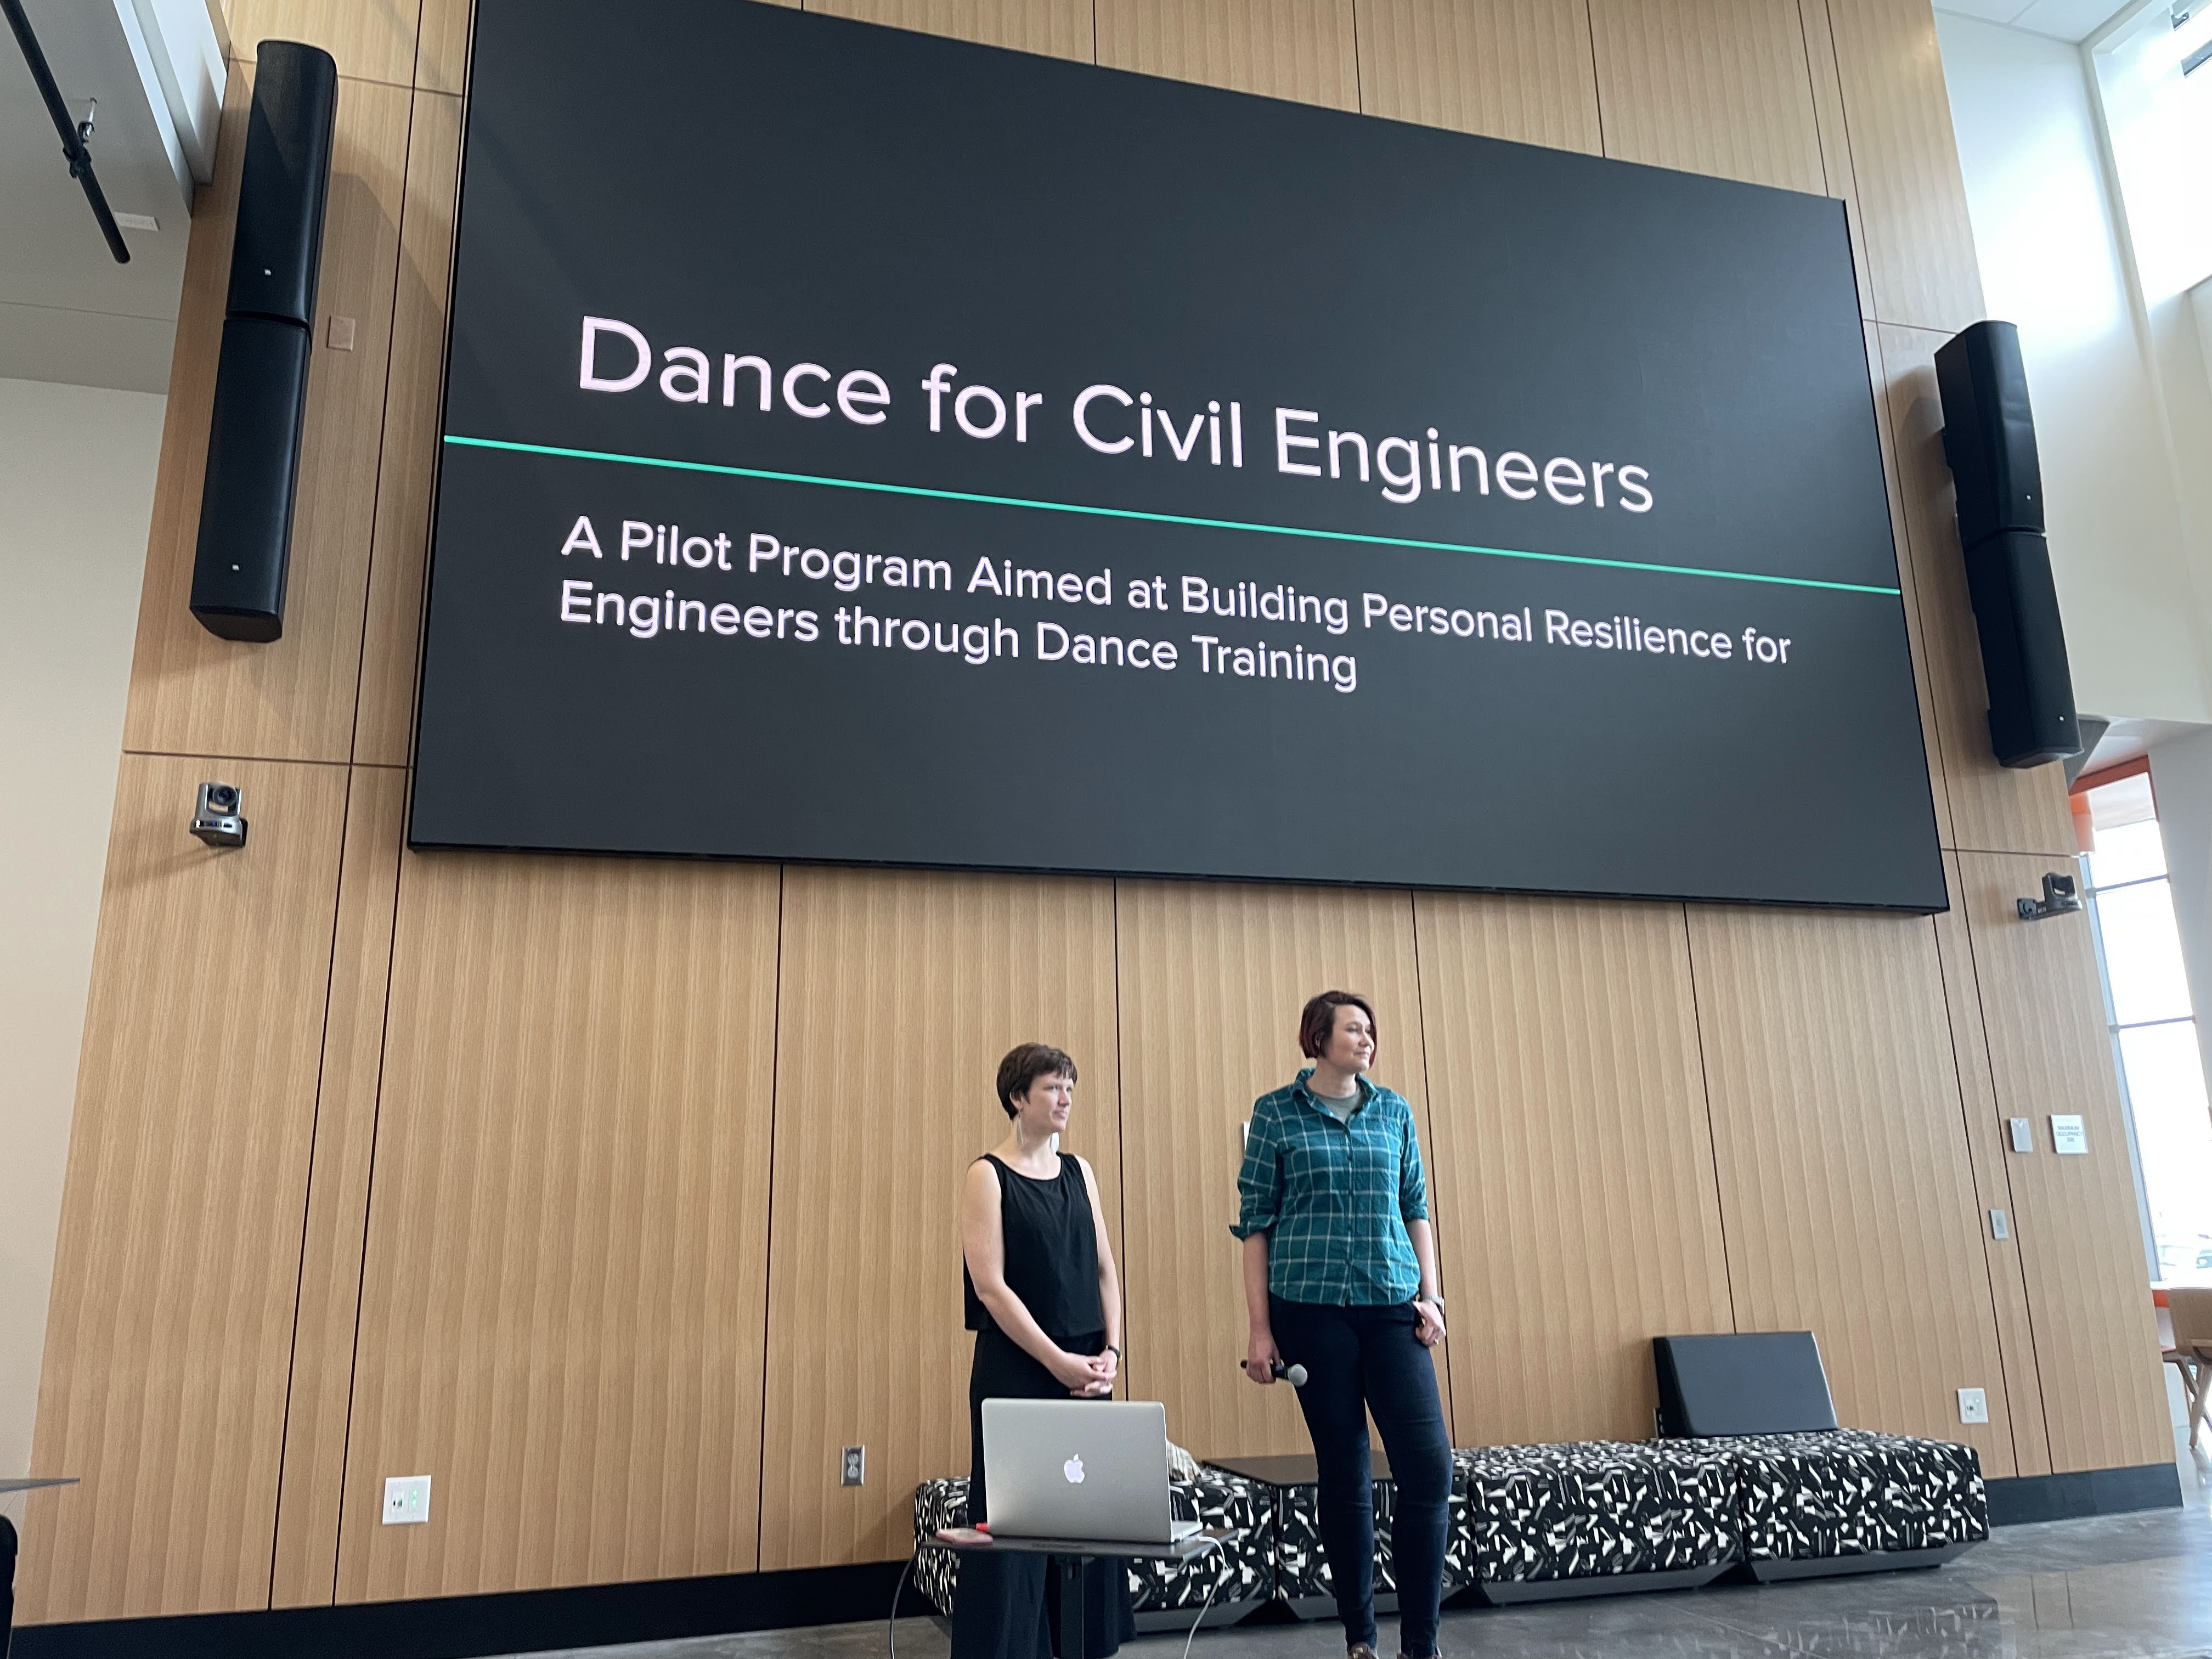 Two women, one wearing a black dress and the other wearing a blue shirt, stand under a presentation screen that reads “Dance for Civil Engineers.”